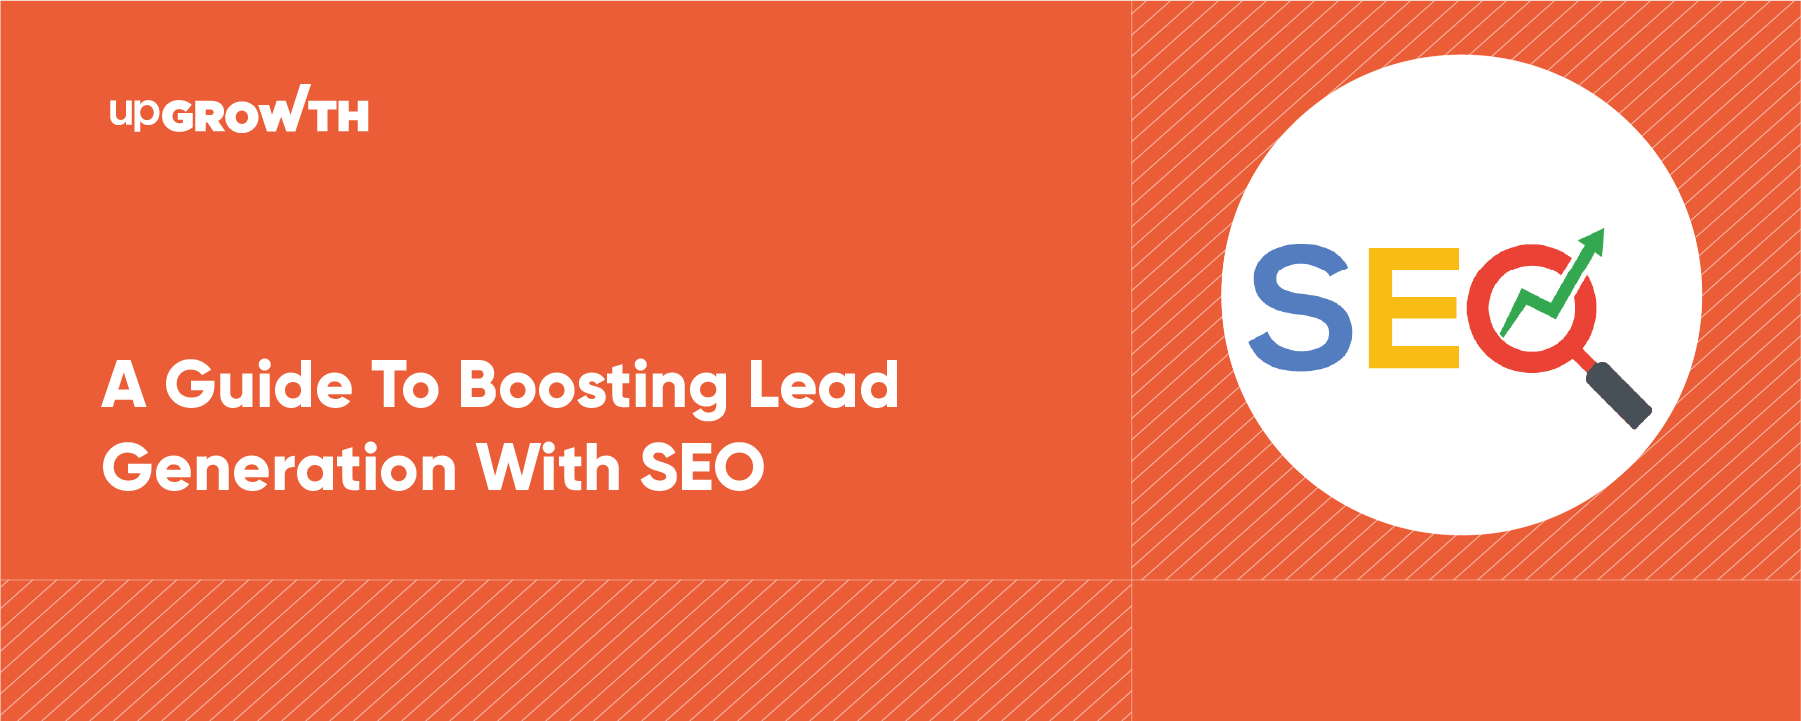 Boosting Lead Generation with SEO: The Ultimate Guide